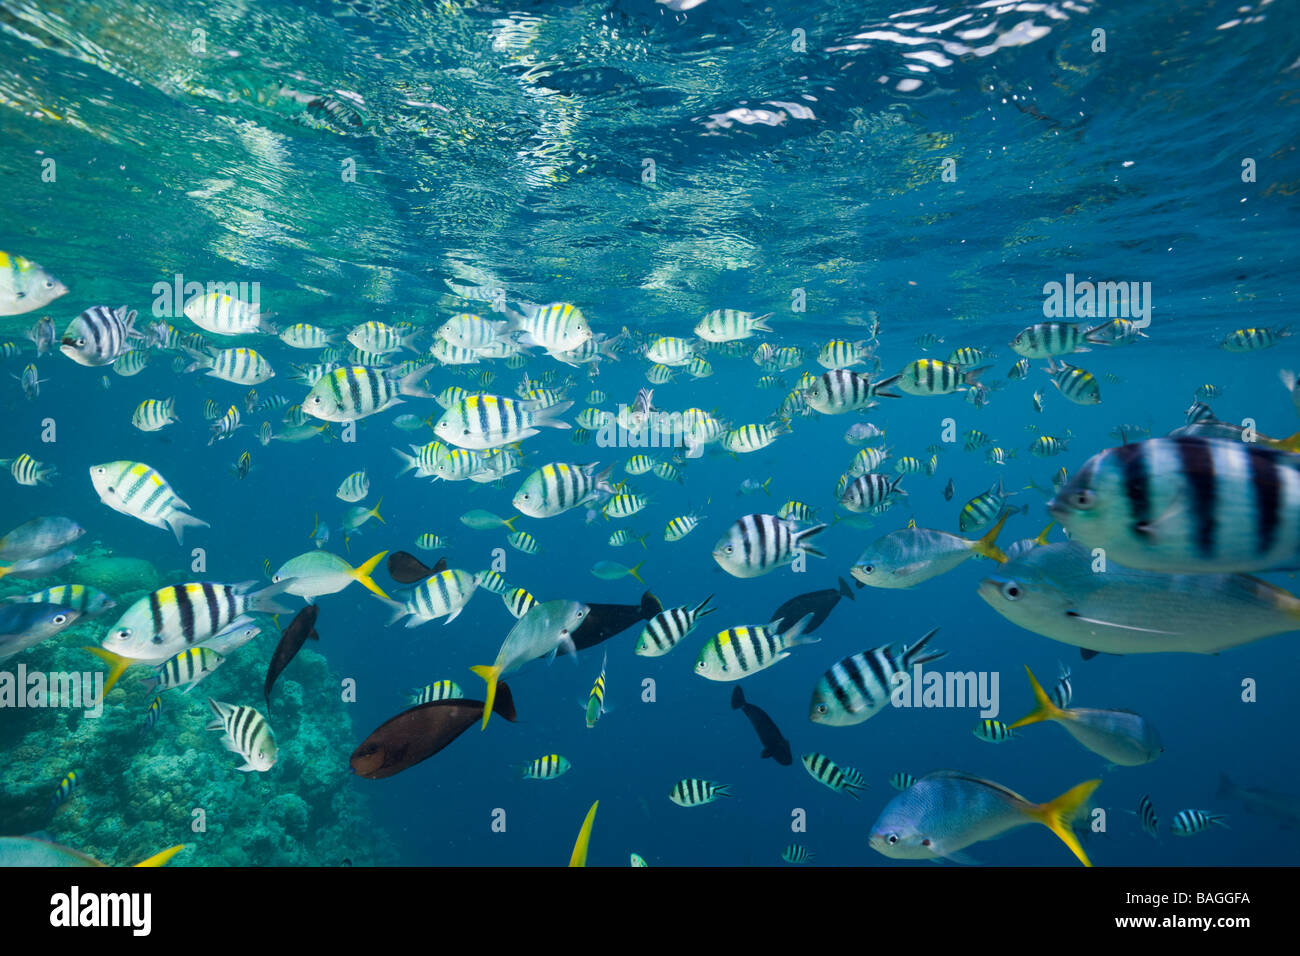 Shoal of Coral Fishes Micronesia Palau schooling Stock Photo